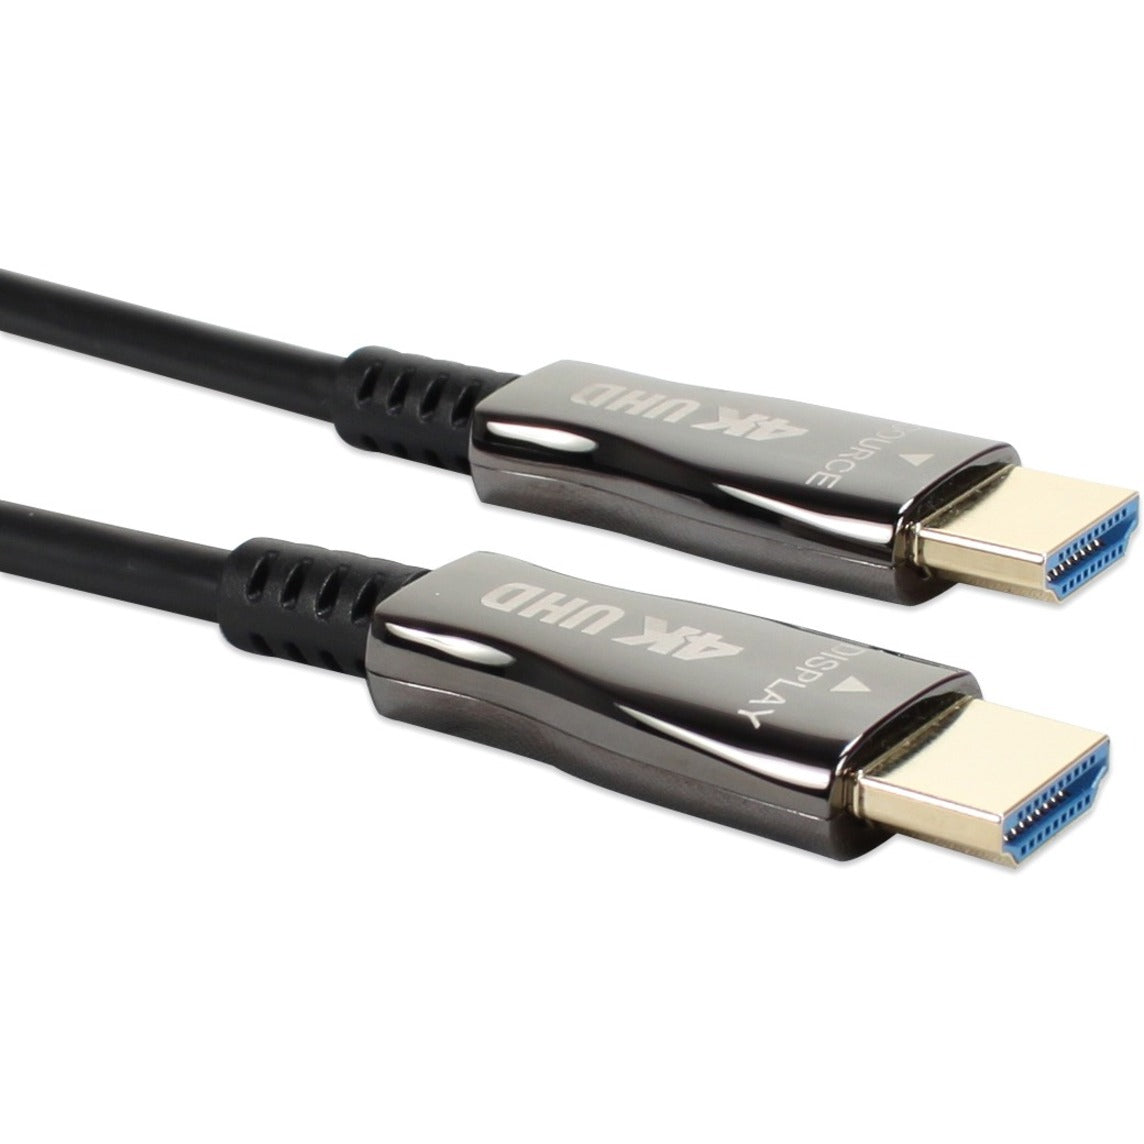 QVS HF-20M HDMI Audio/Video Cable, 65.62 ft, 3840 x 2160 Supported Resolution